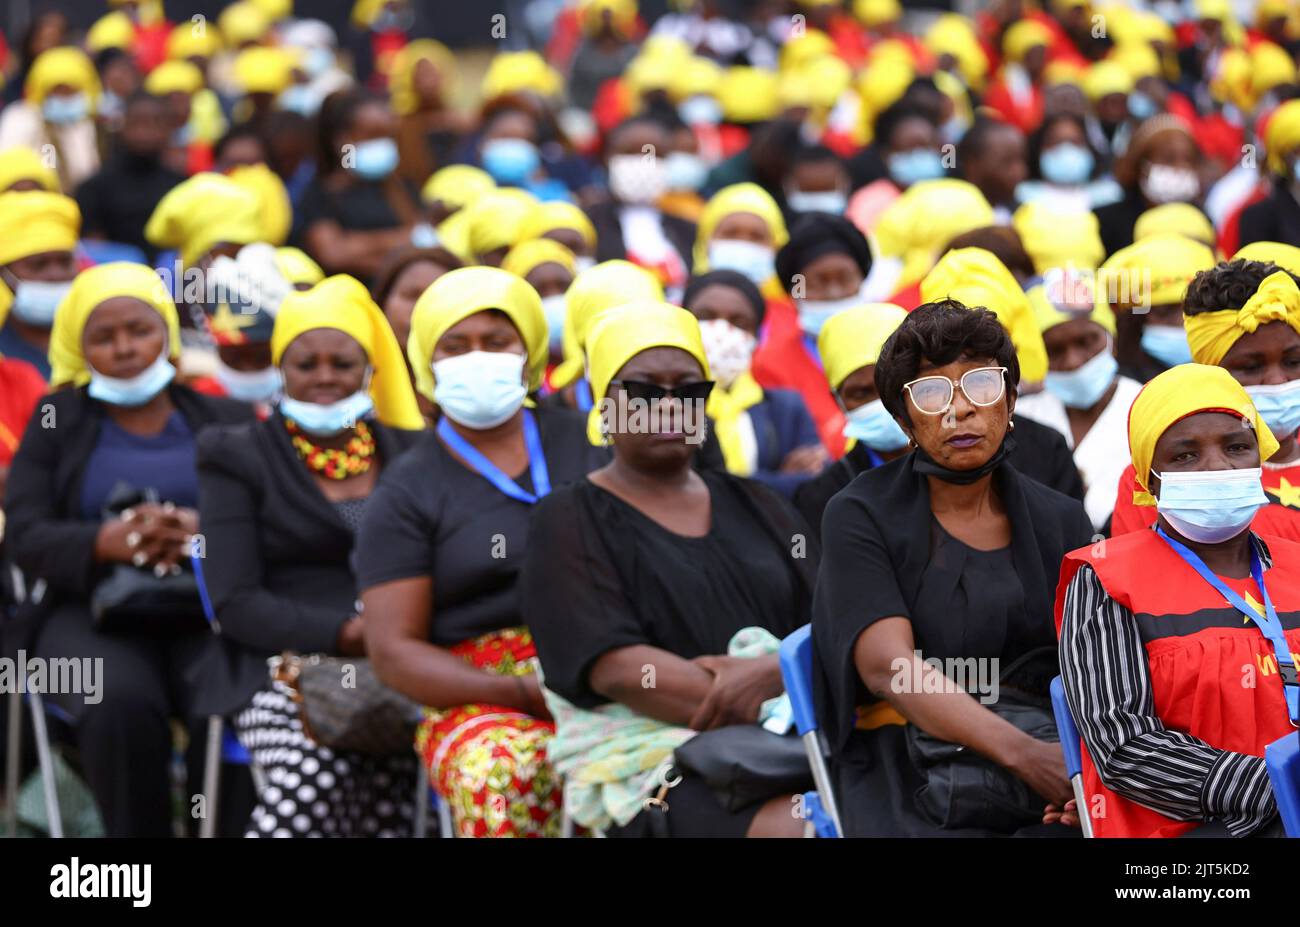 Angolans look on as they gather for the funeral of Angola's former President Jose Eduardo dos Santos, who died in Spain in July, at the Agostinho Neto Memorial, in Luanda, Angola, August 28, 2022. REUTERS/Siphiwe Sibeko Stock Photo